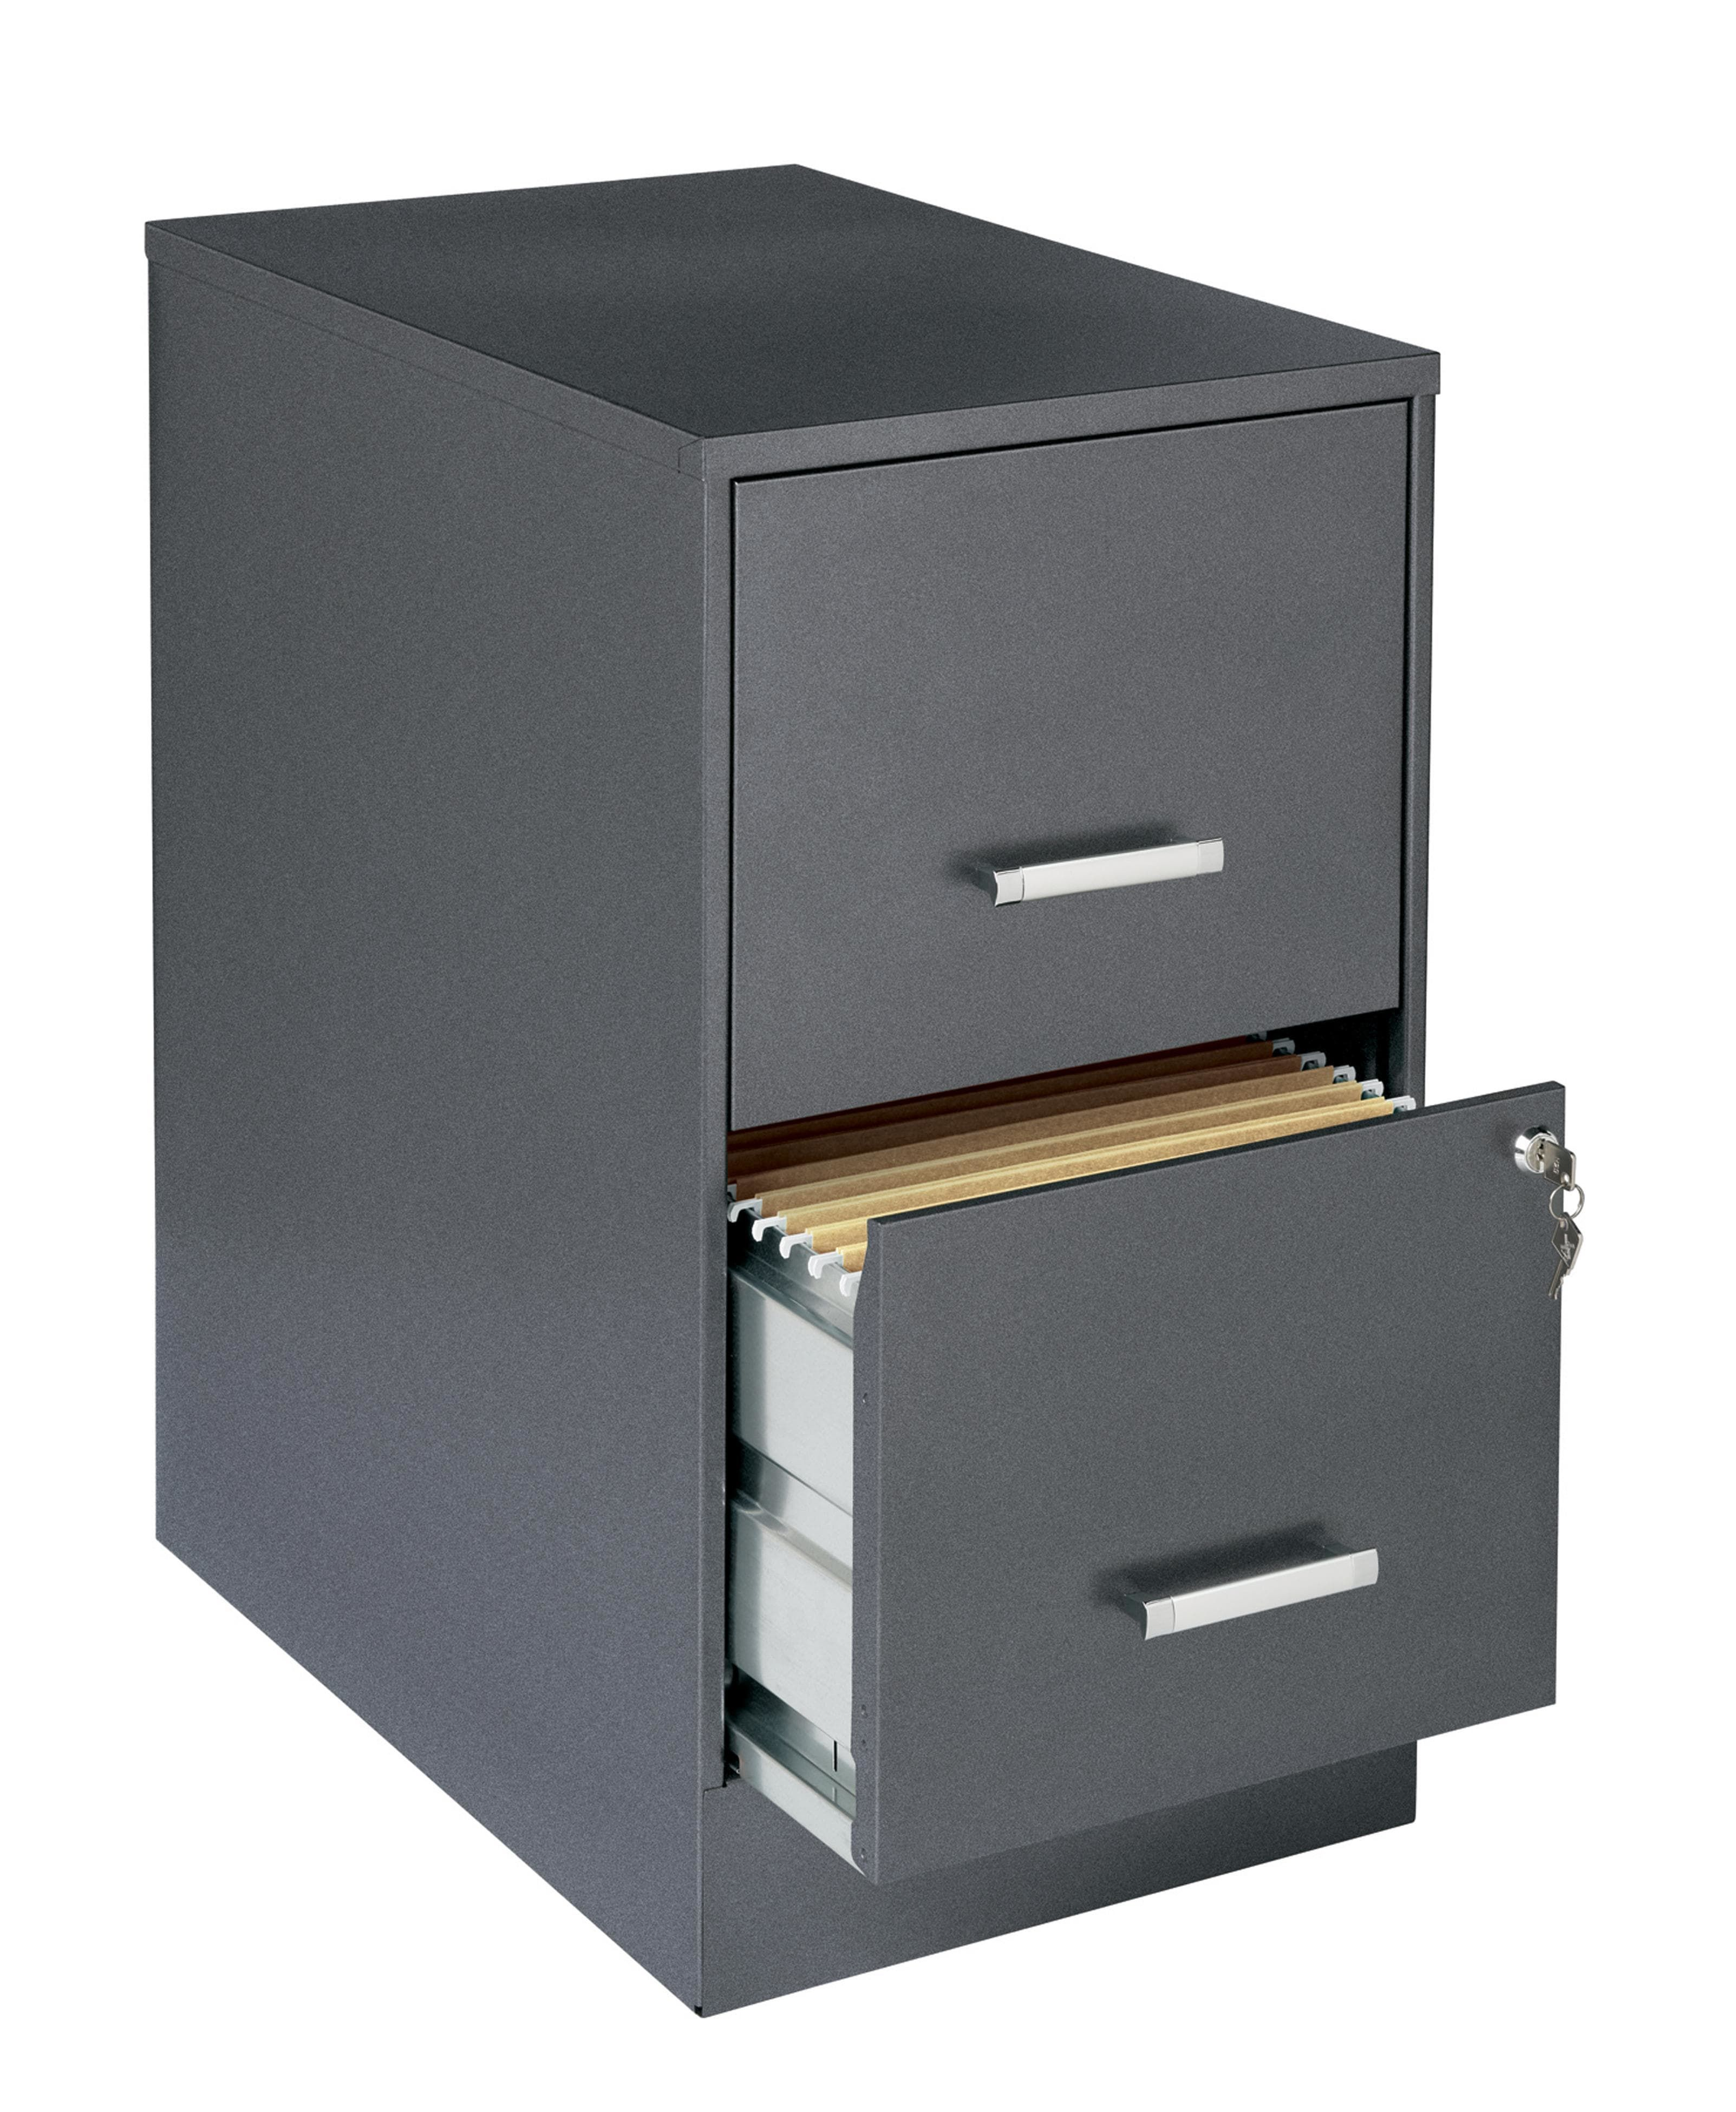 Office Designs Metallic Charcoal Colored 2 Drawer Steel File Cabinet for dimensions 3206 X 3900